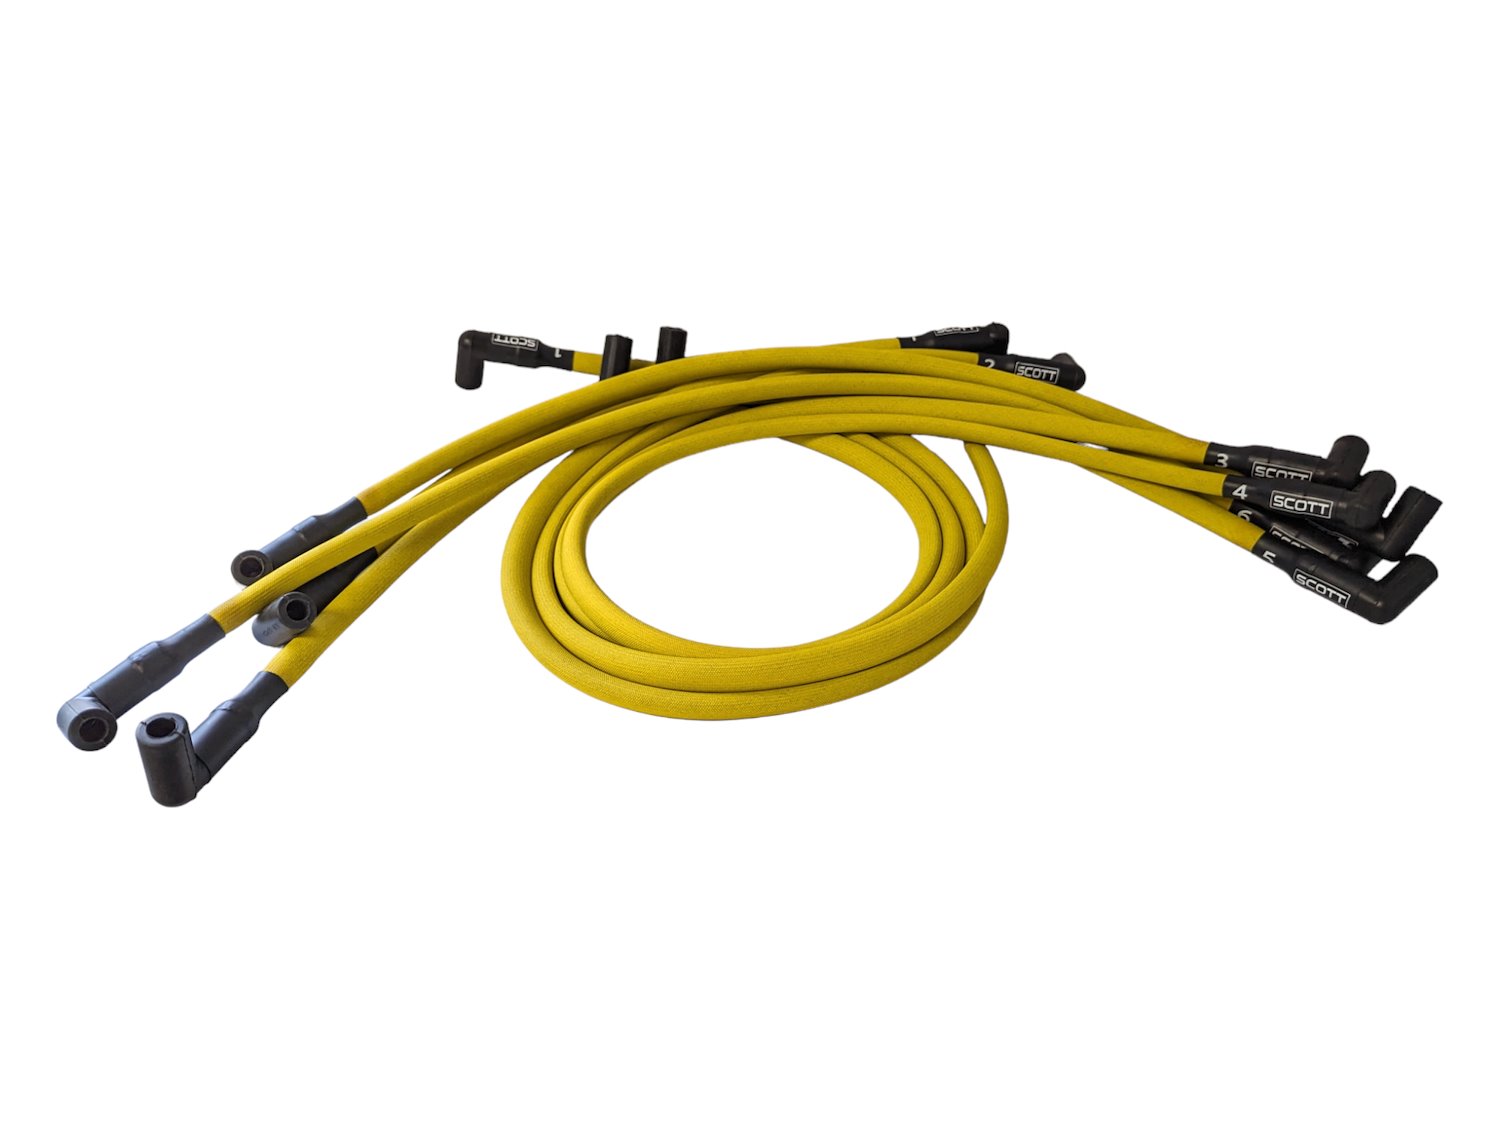 SPW300-PS-435-5 Super Mag Fiberglass-Oversleeved Spark Plug Wire Set for Small Block Chevy, Around Front [Yellow]